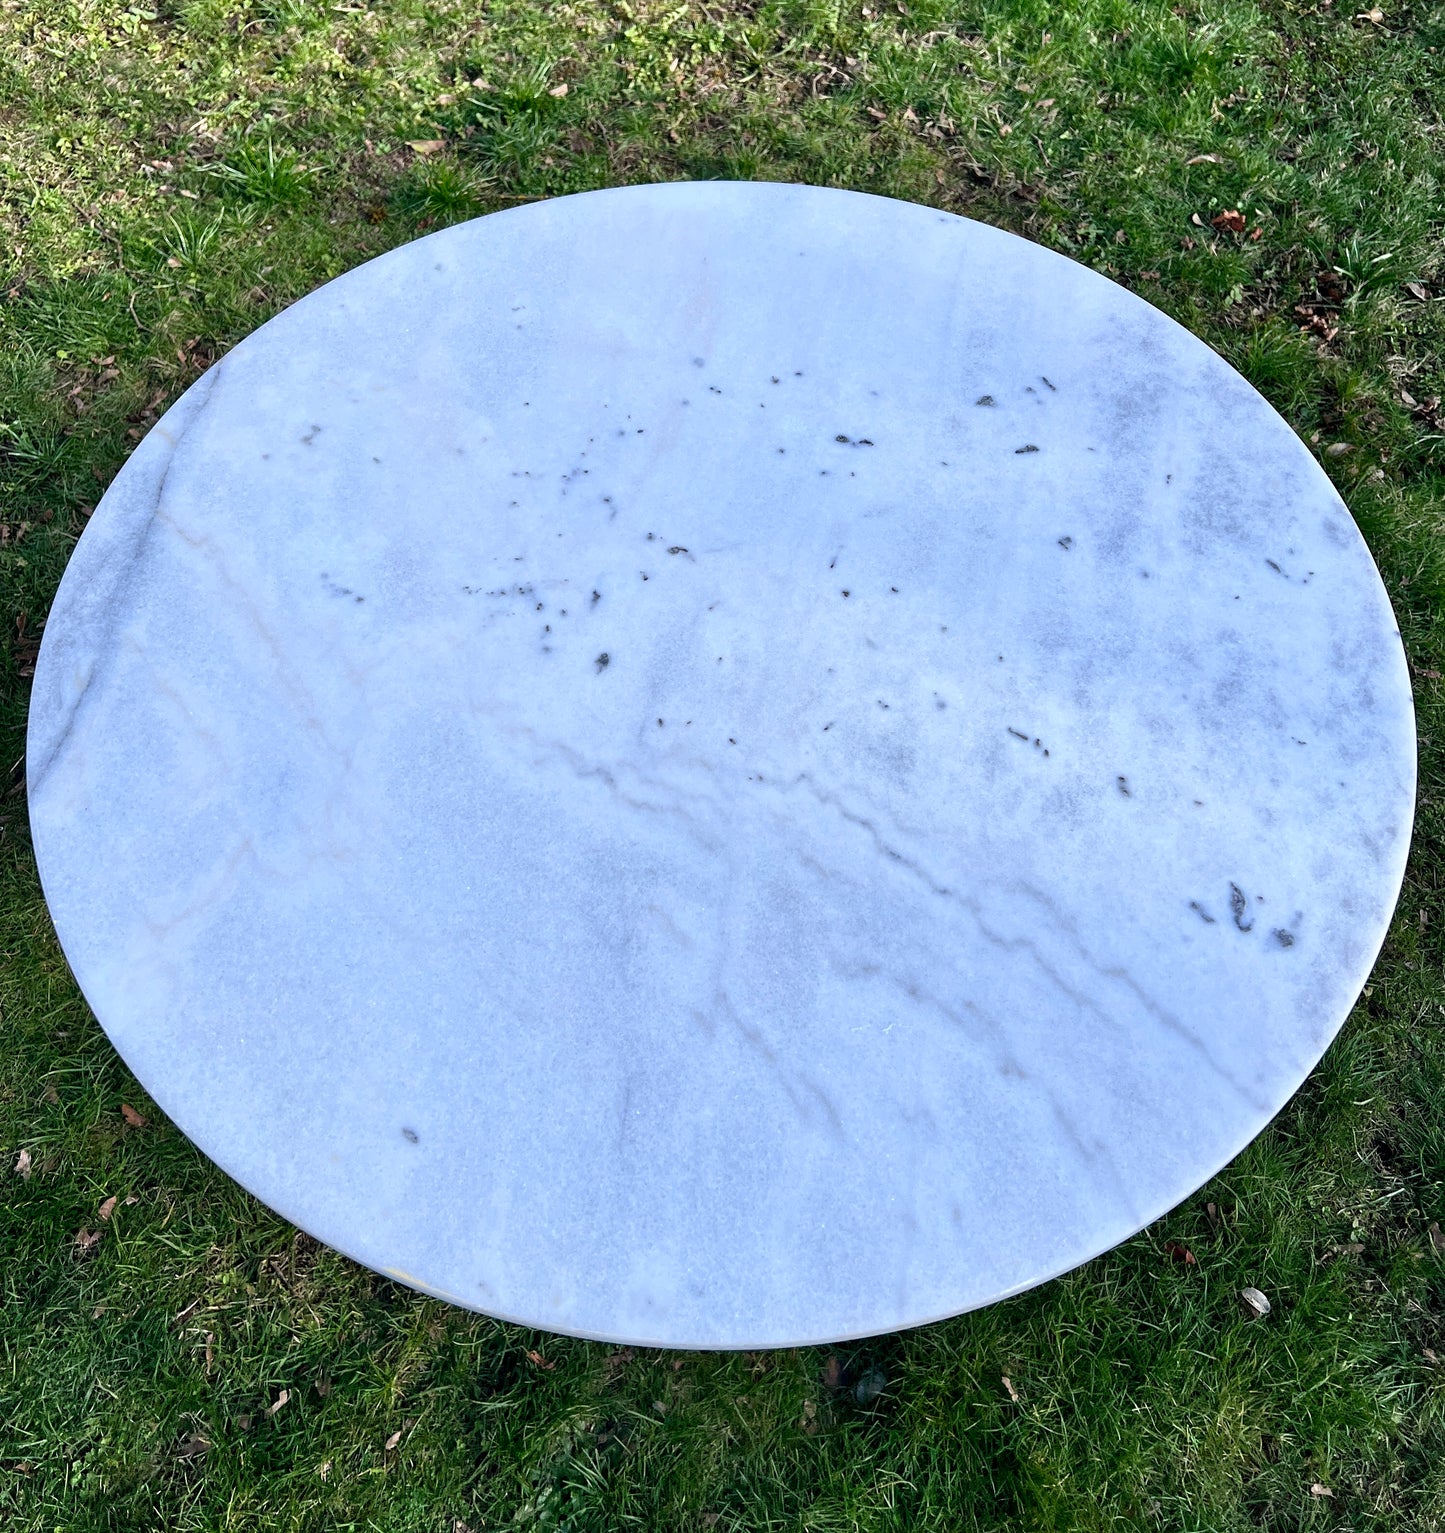 The Marvellous Marble Tables